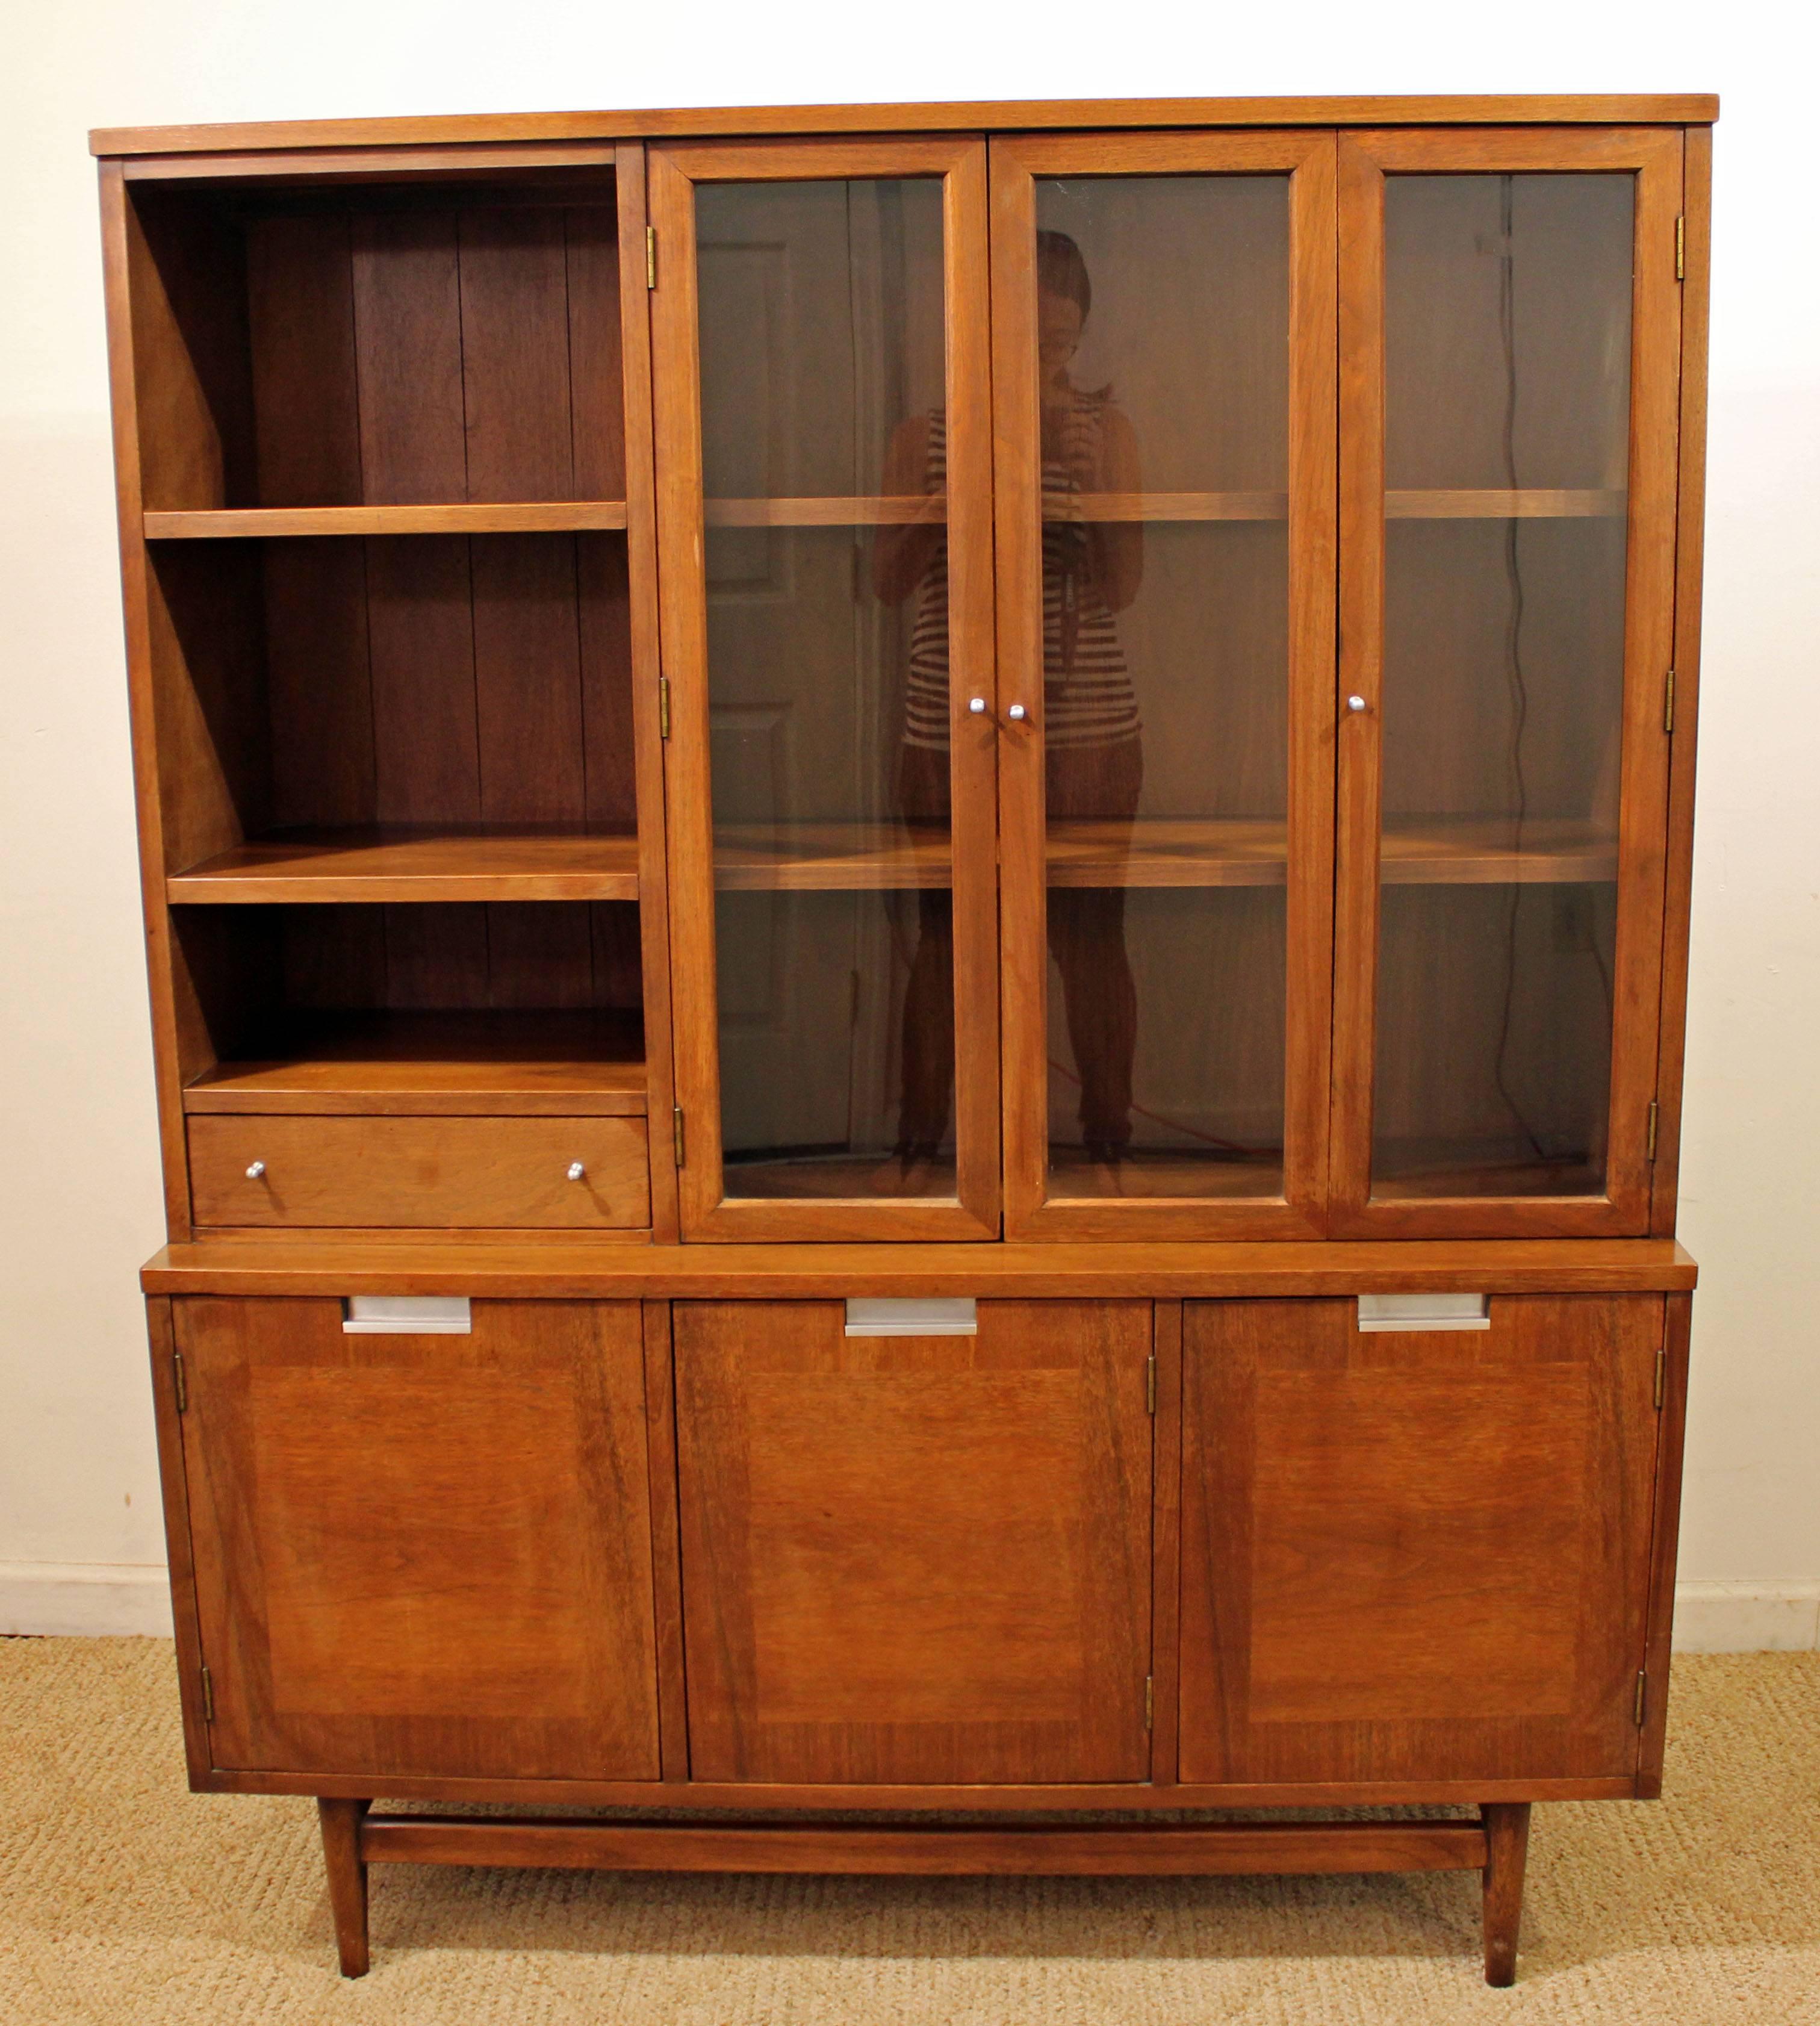 This is a walnut china cabinet with two glass doors and shelving on top and three cabinets underneath. Features brushed aluminium pulls. It was made by American of Martinsville.